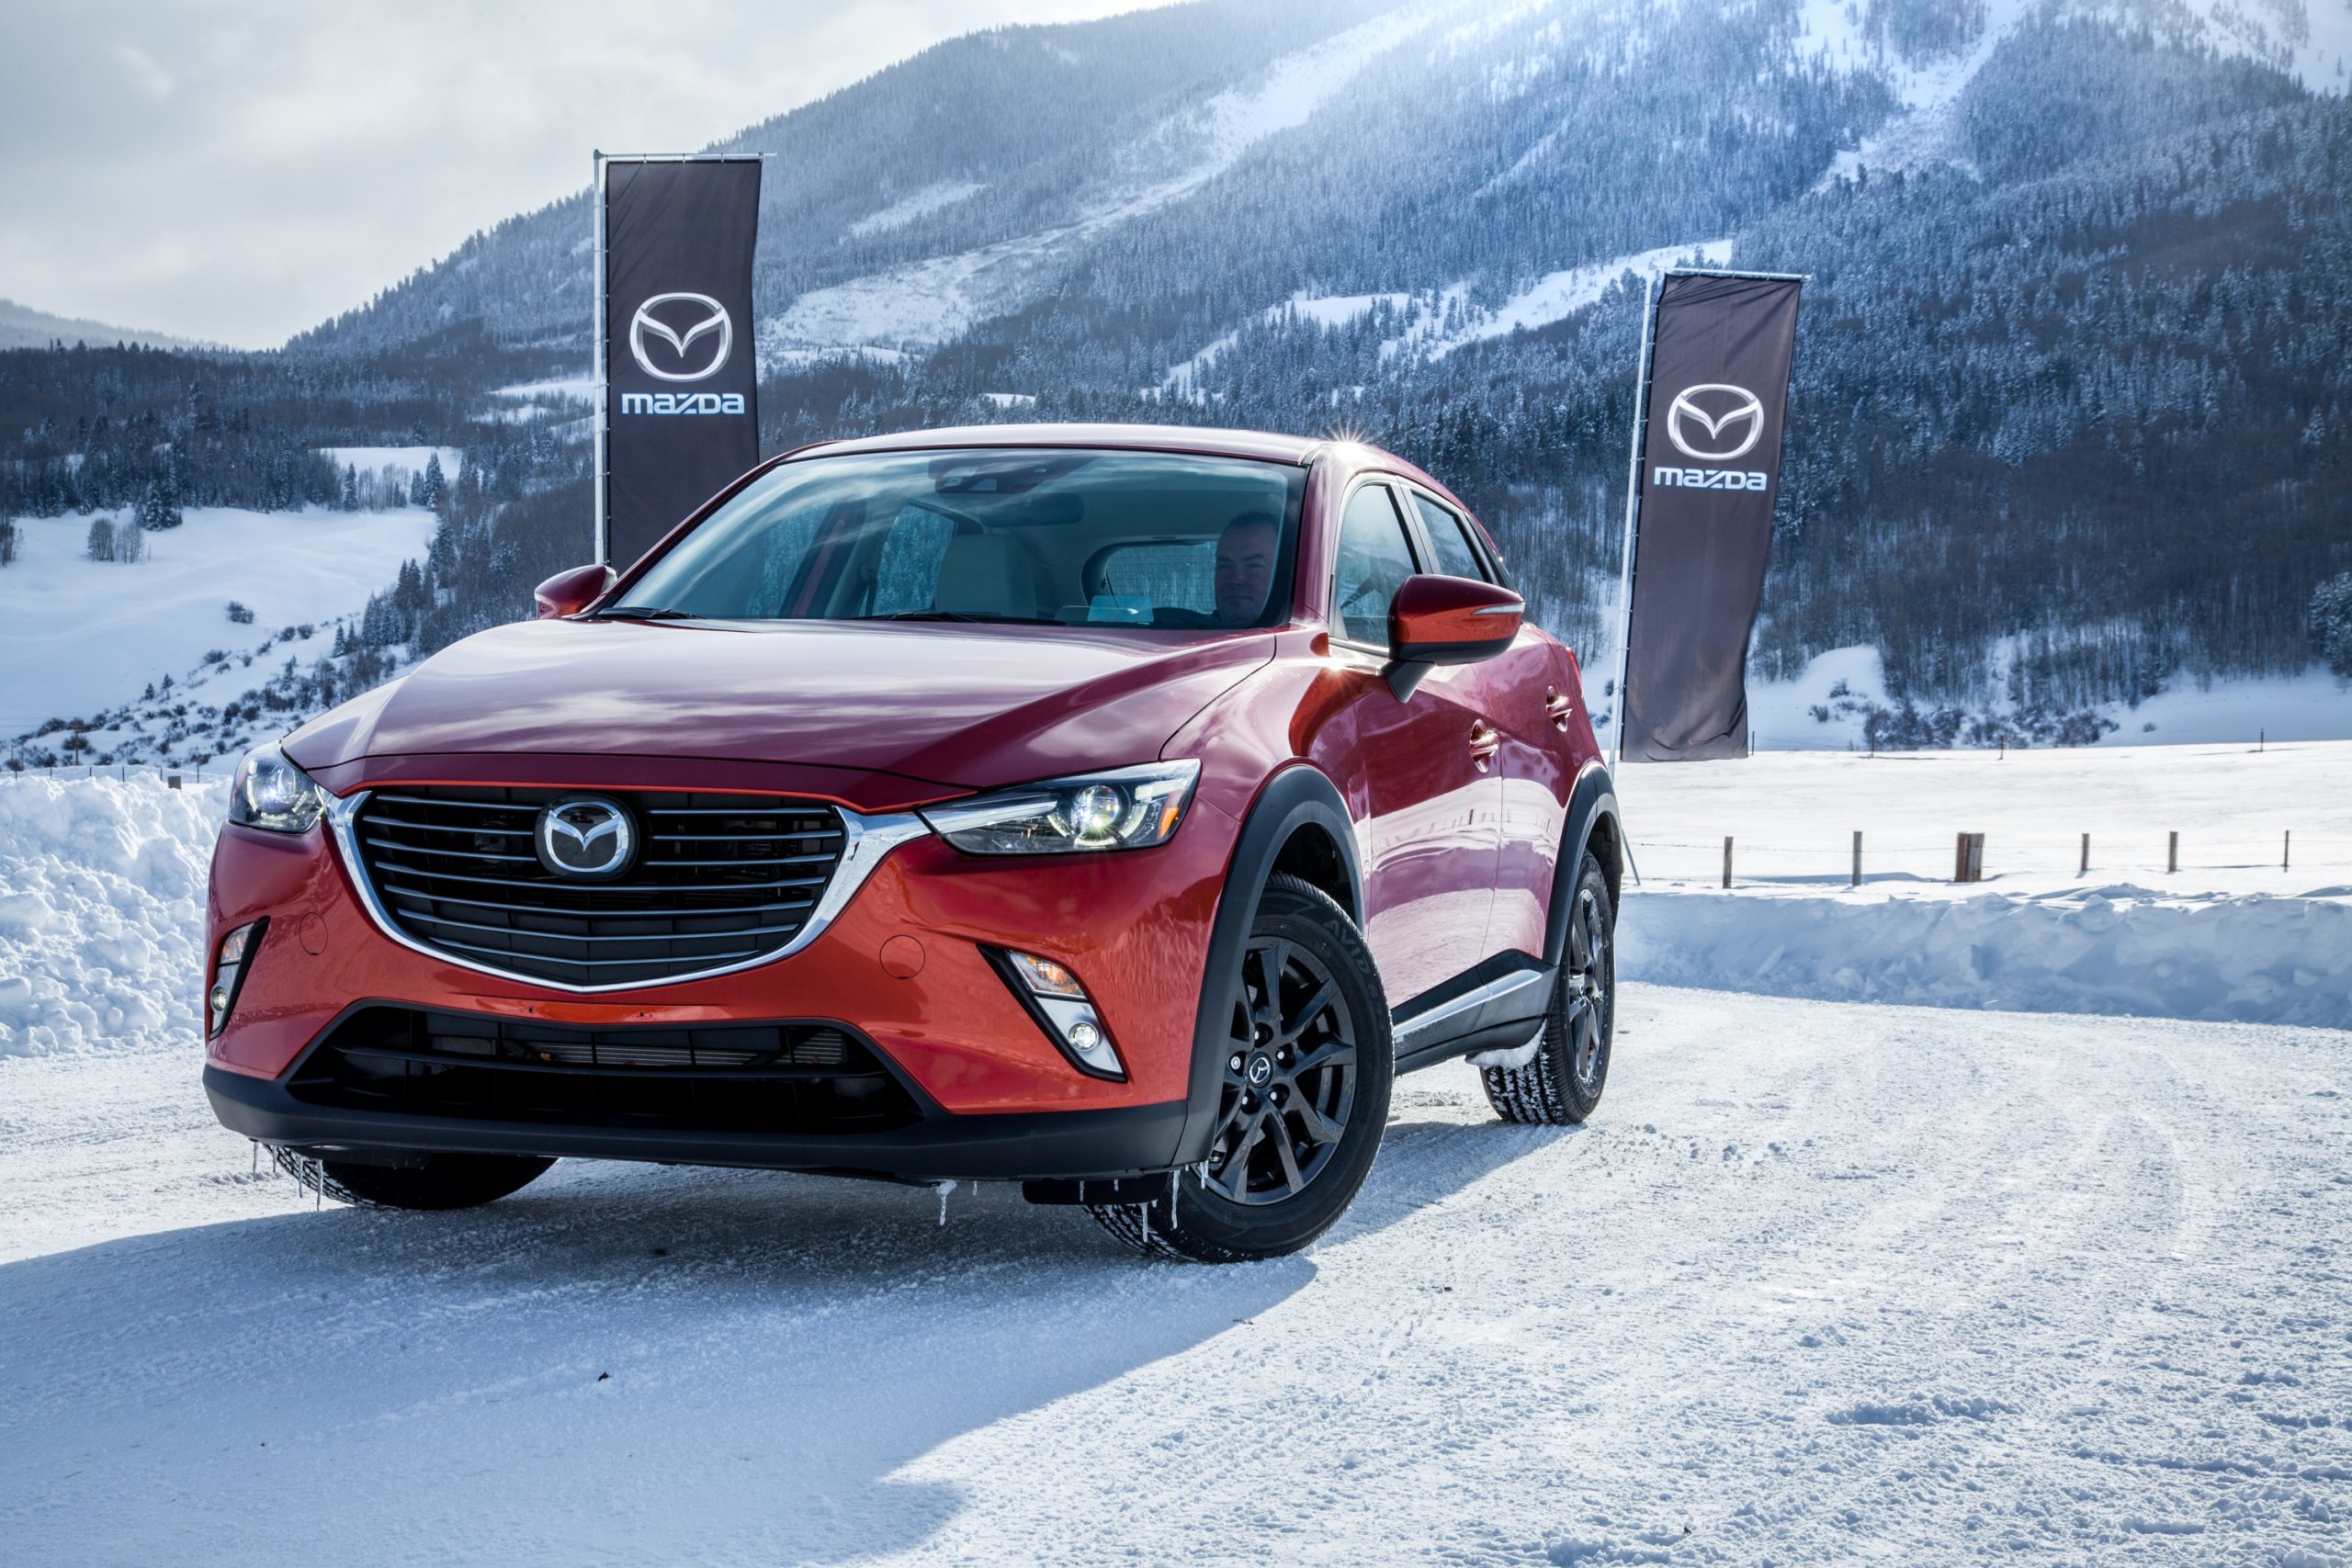 A red 2017 Mazda CX-3 parked in the show with Mazda flags in the background